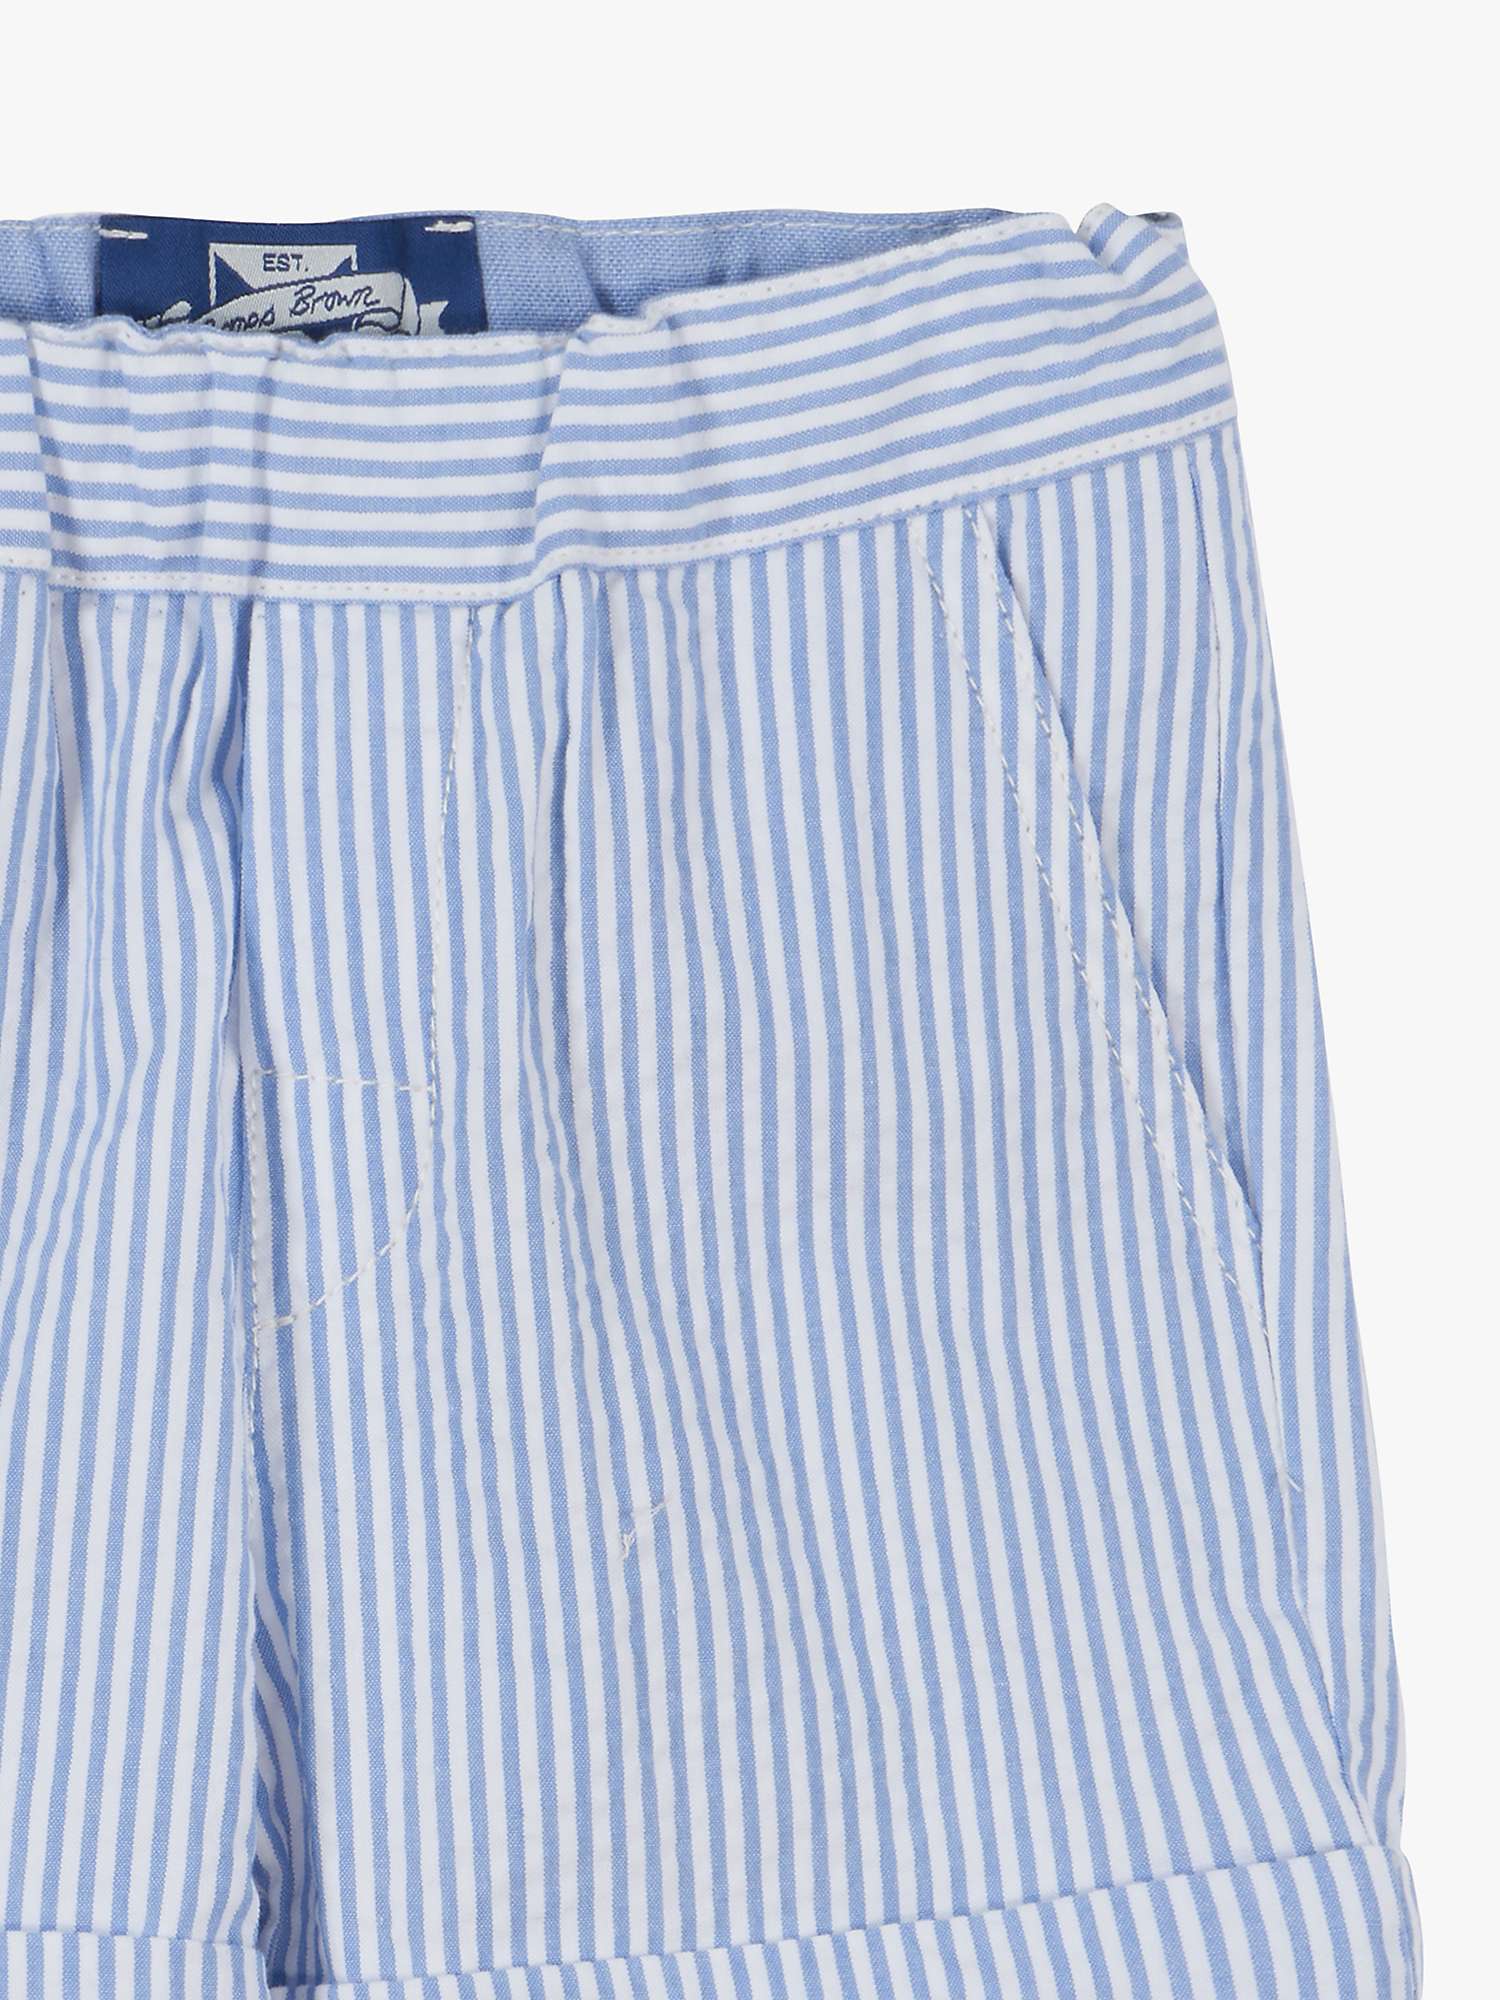 Buy Trotters Baby Charlie Stripe Pull Up Shorts, Blue Online at johnlewis.com